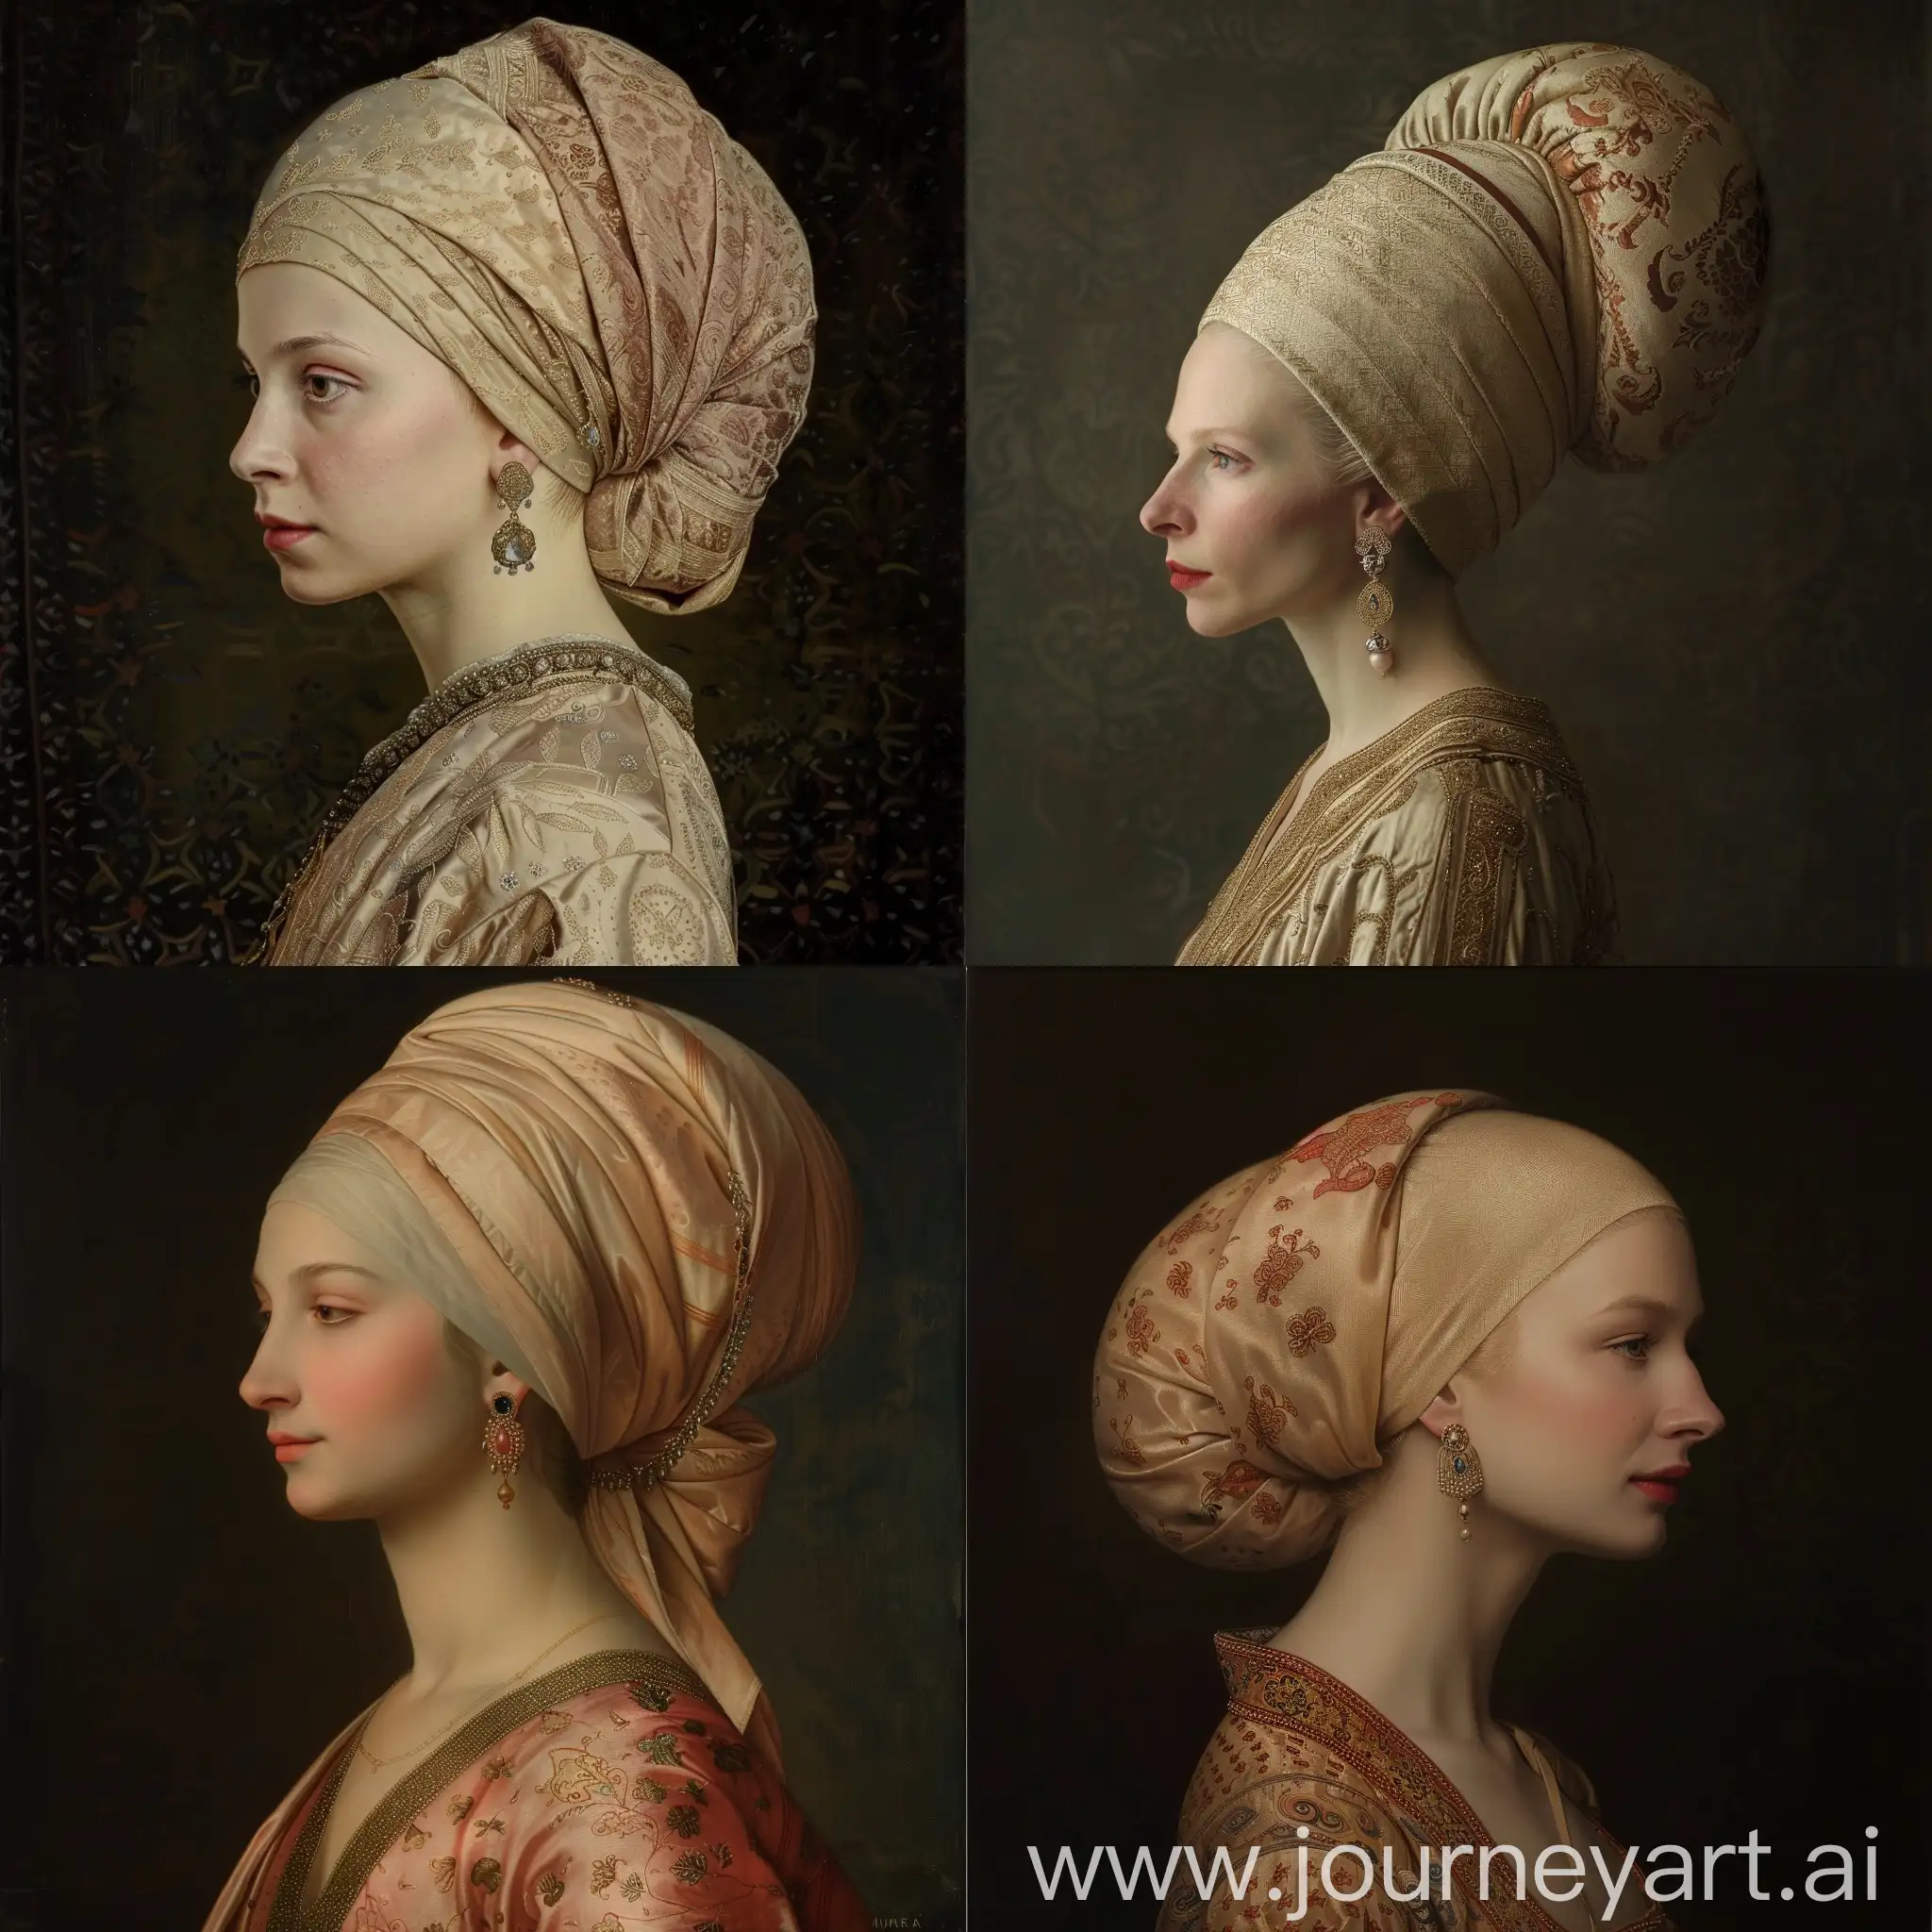 Portrait of Hürrem Sultan (Roxelana), the wife of Ottoman Sultan Suleiman the Magnificent, depicted in Ottoman silk robe and headdress, pale skin, slightly blonde hair, small lips, small nose, beautiful, nice earrings, side pose, dramatic lighting